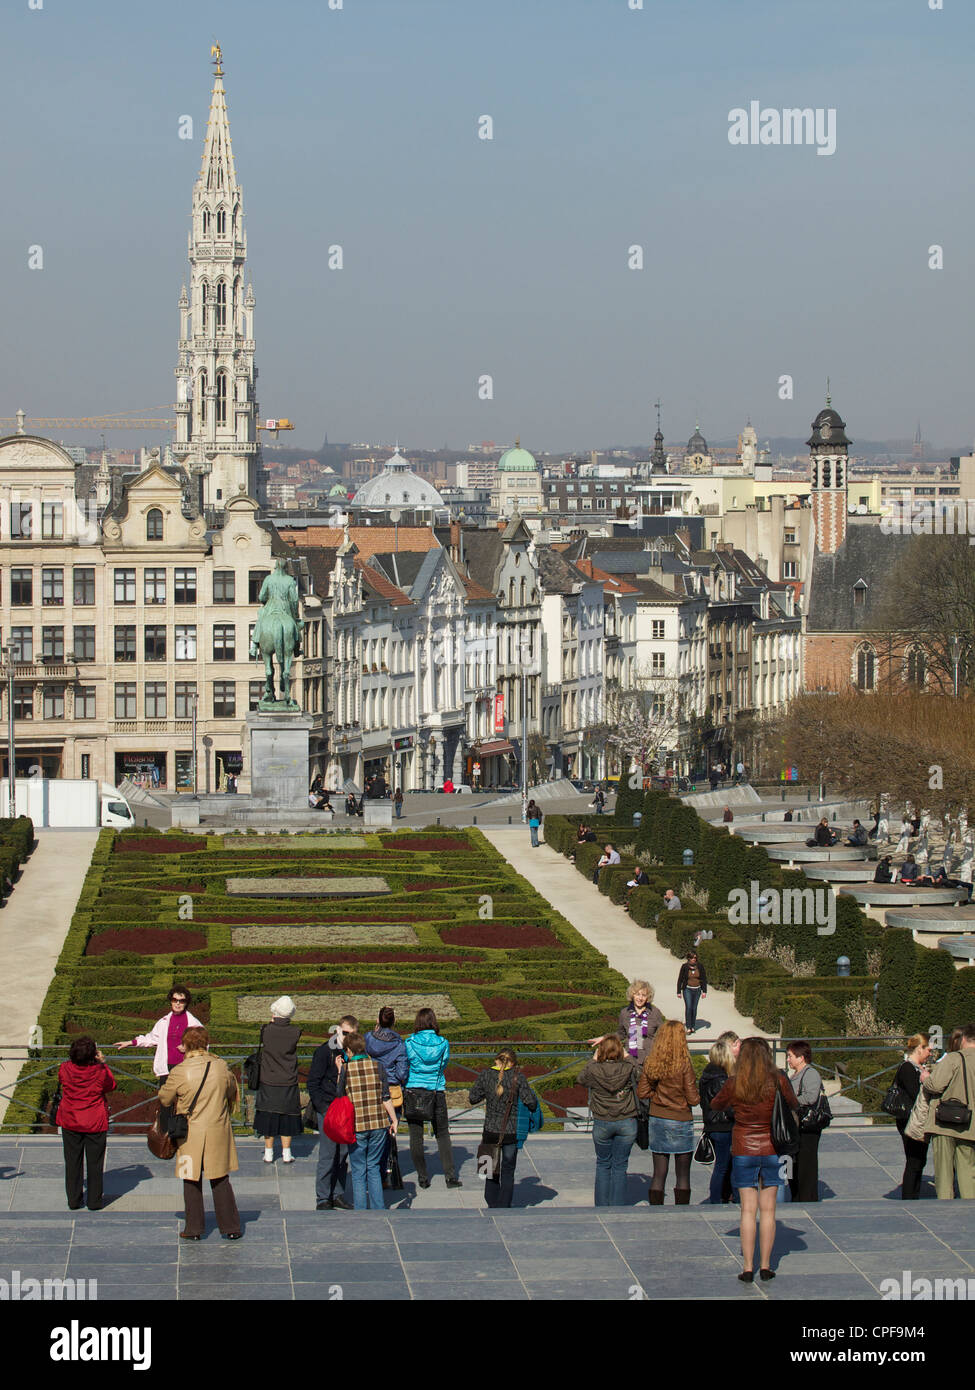 Brussels city center seen from Kunstberg park, with many tourists. Belgium Stock Photo